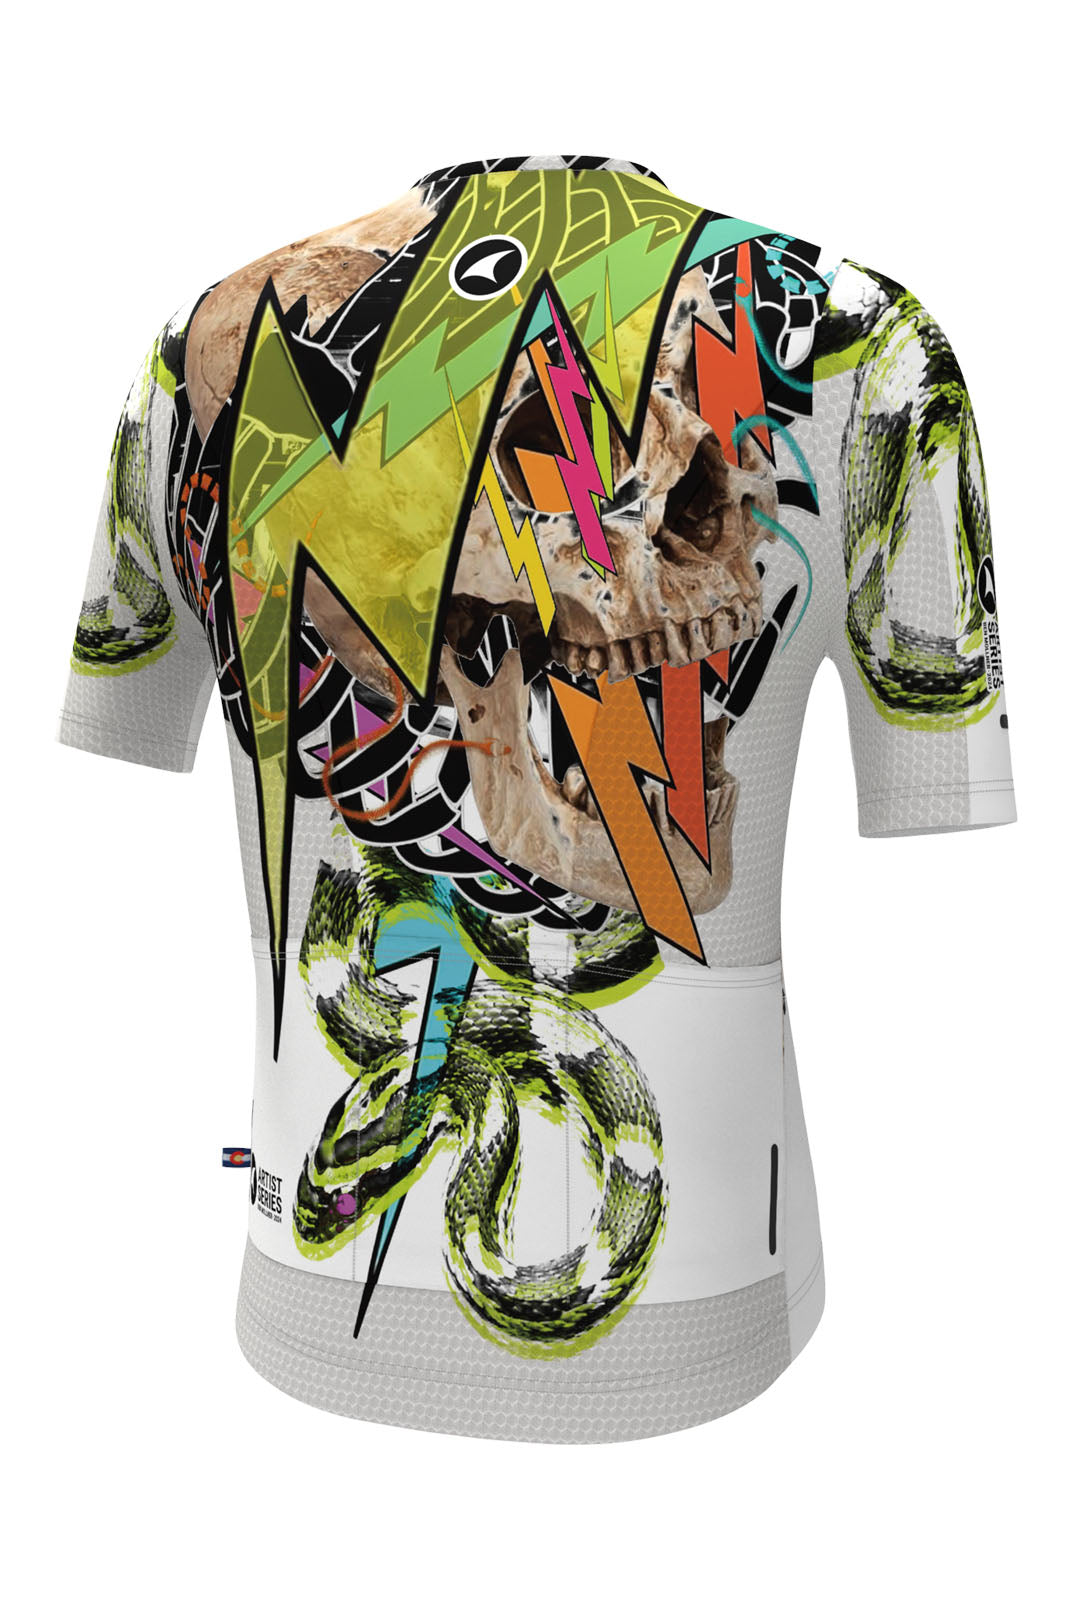 Men's Unique Cycling Jersey - Best Served Cold White Back View